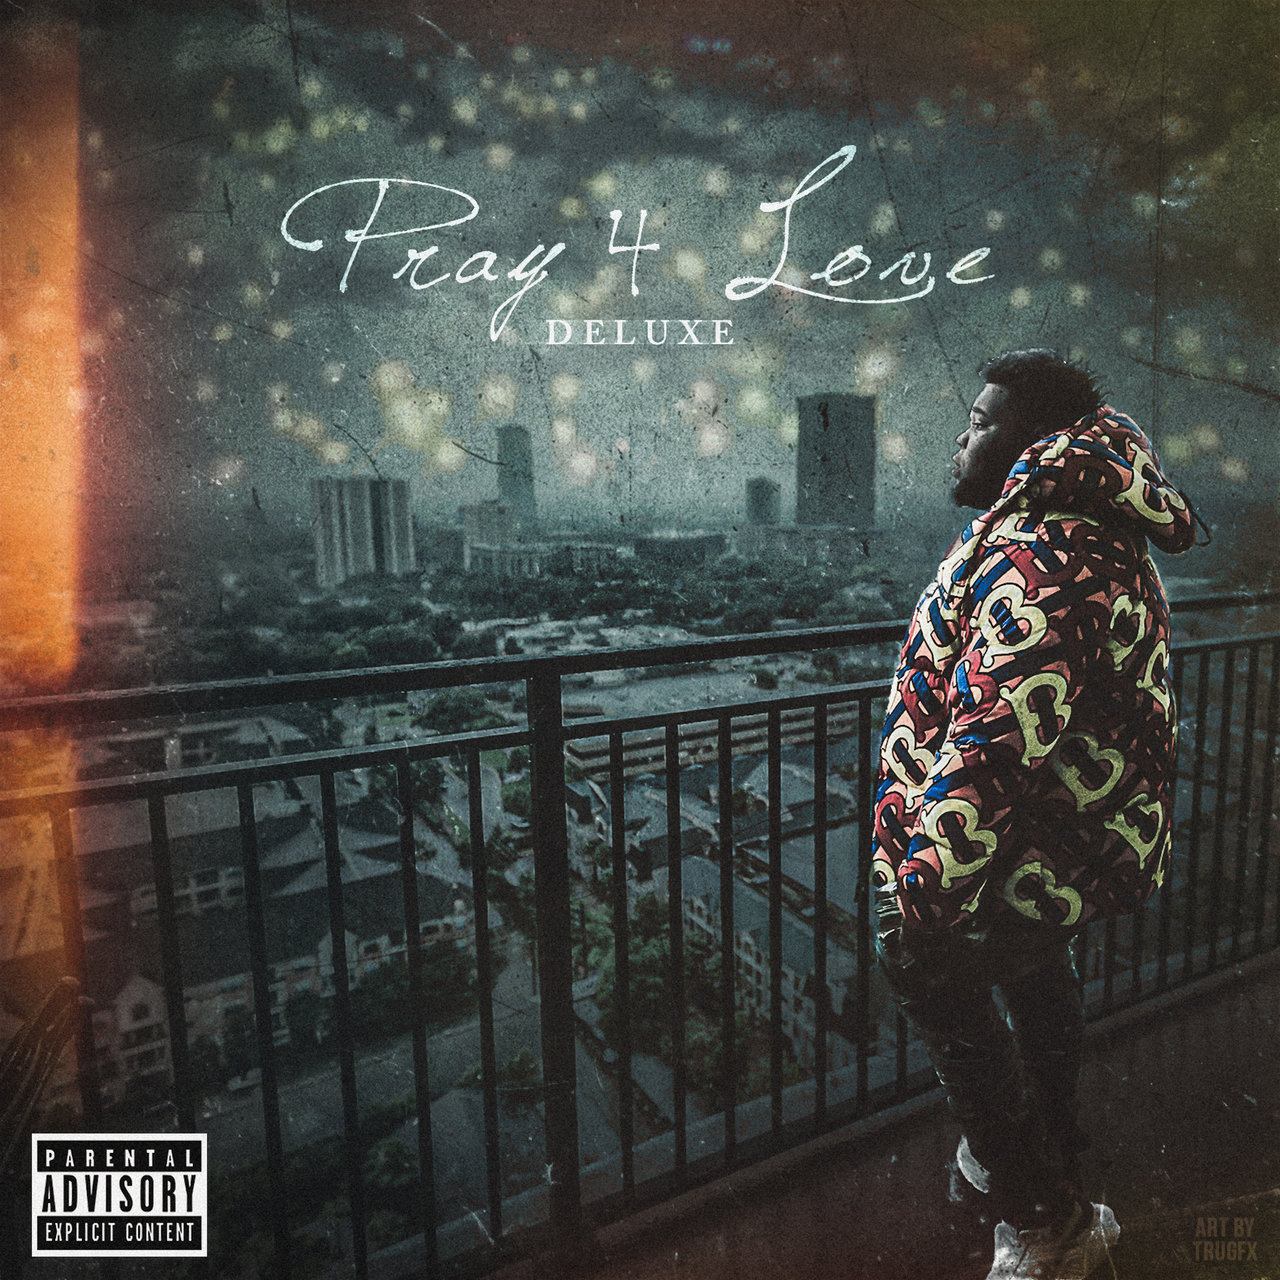 Rod Wave - Pray 4 Love (Deluxe) (Cover)